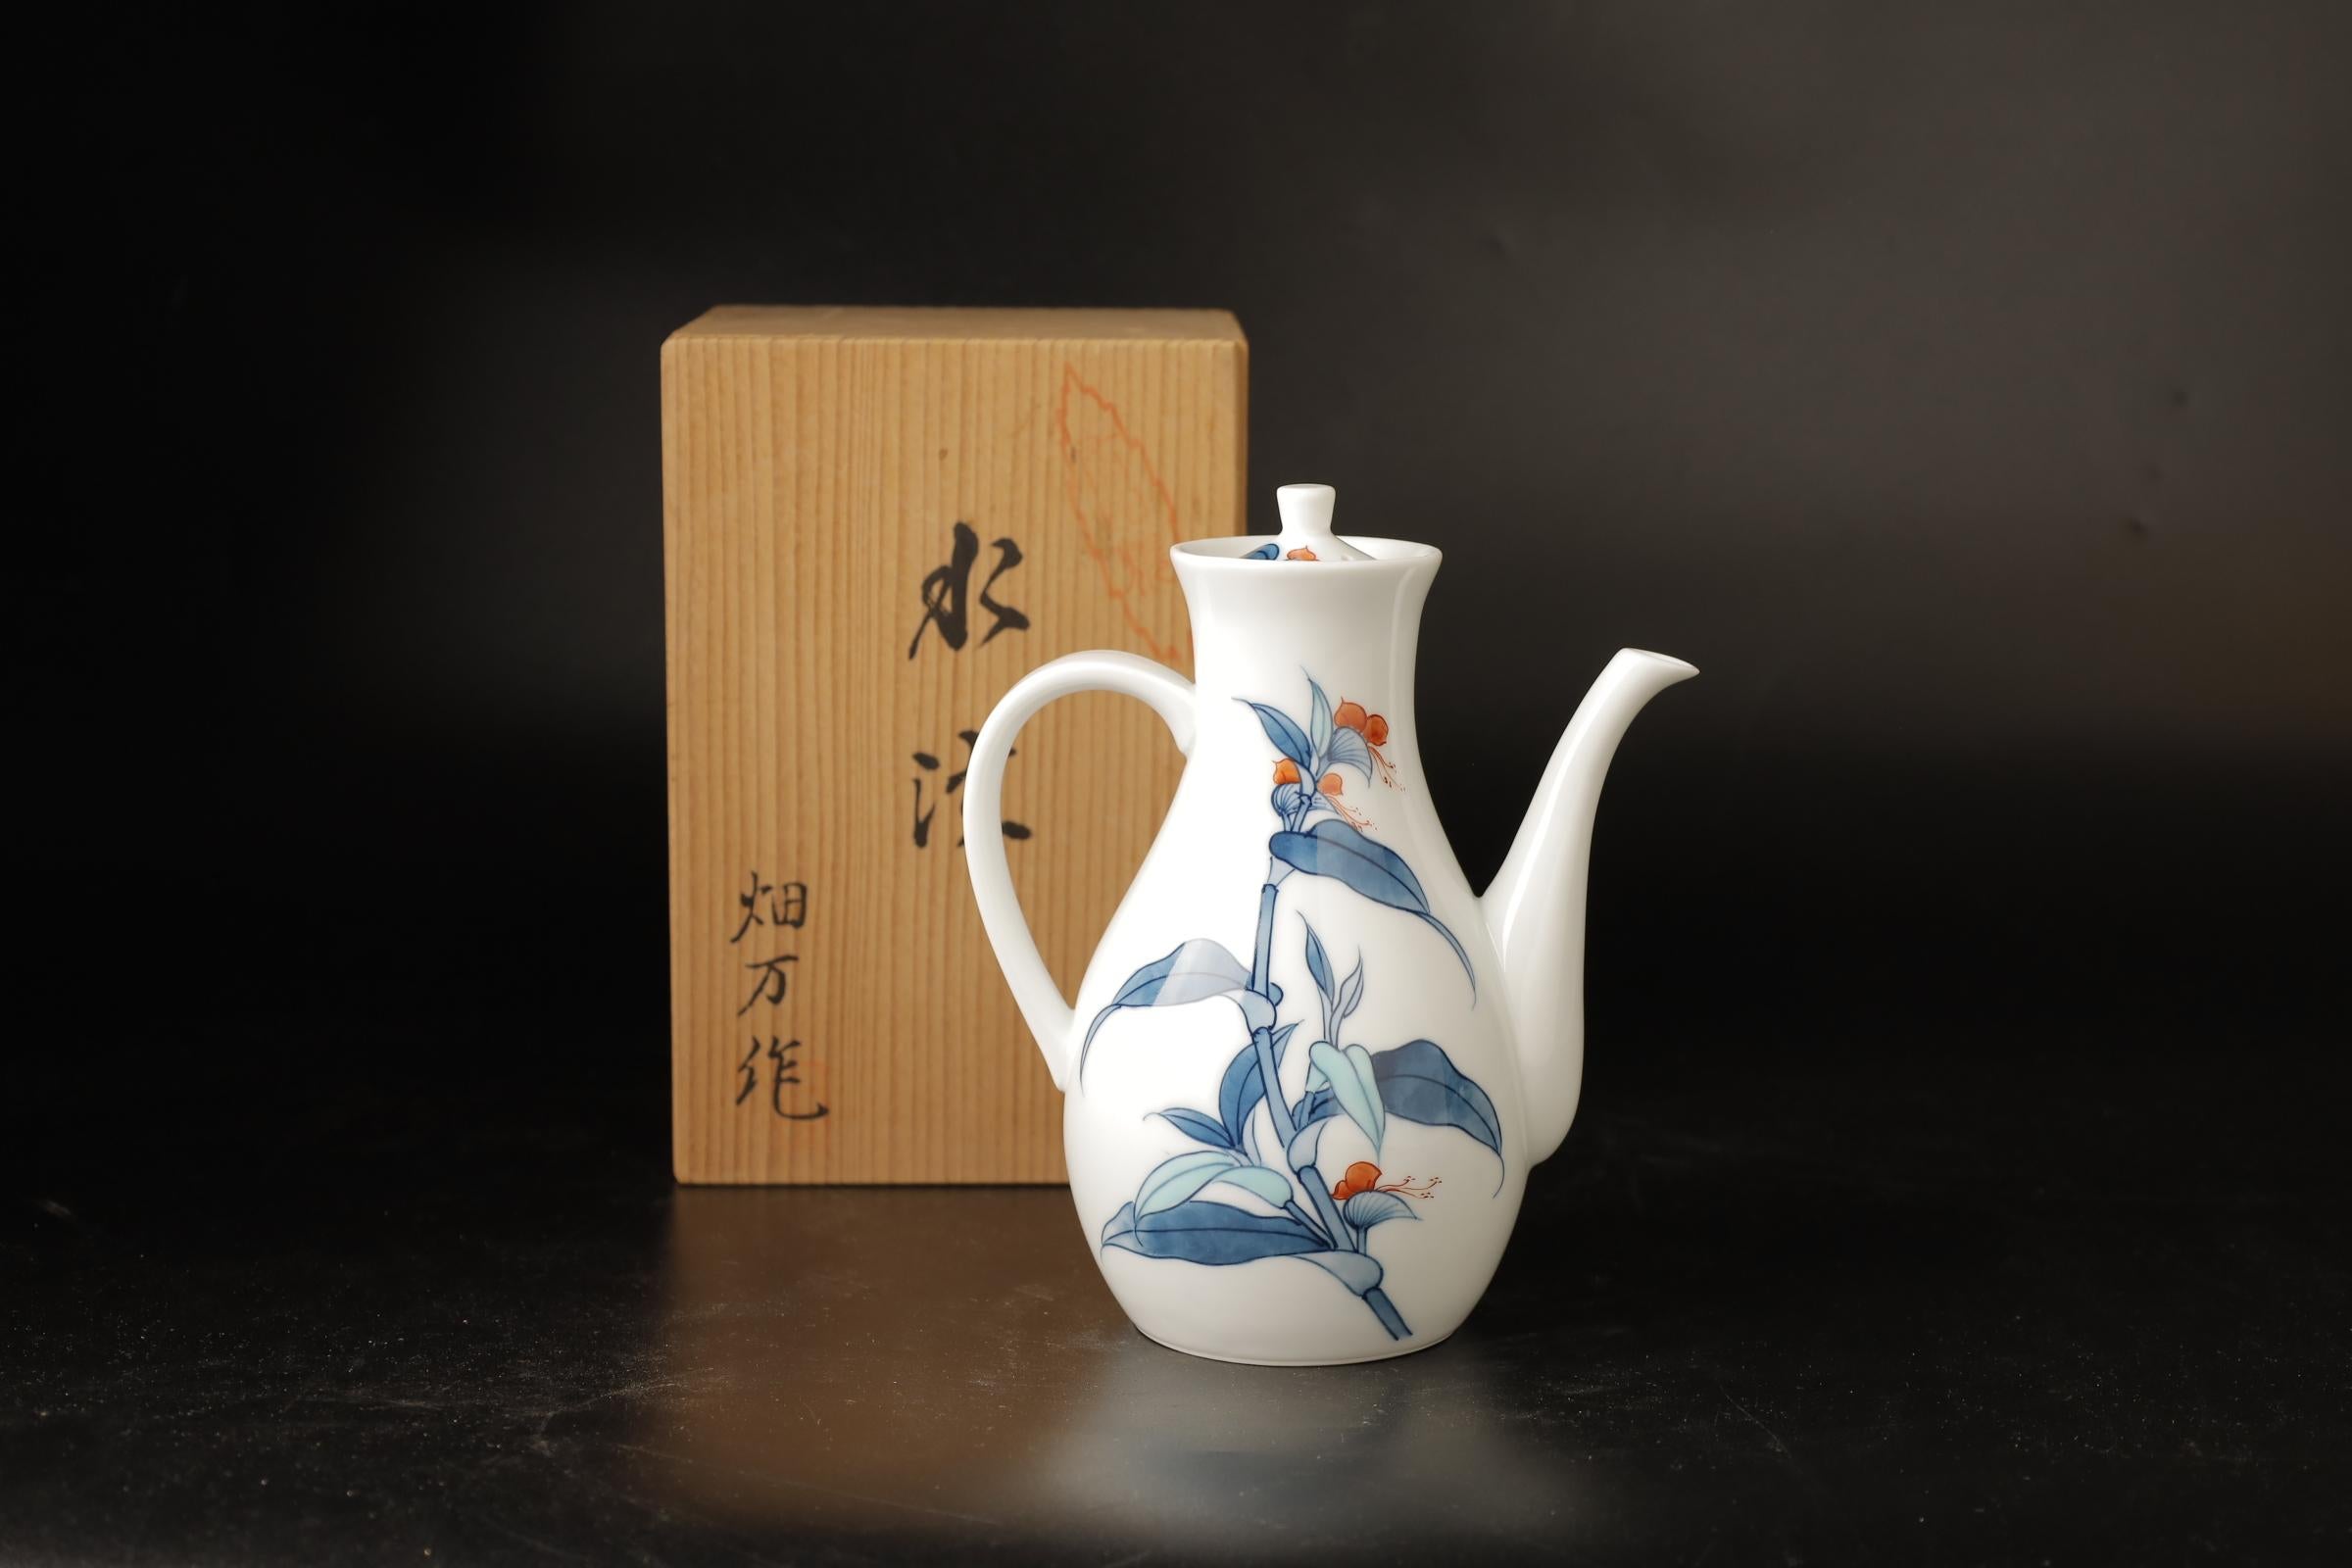 This superb late Edo period porcelain teapot is a masterpiece of Japanese craftsmanship. It was made by the Hataman Touen Corporation in Imari, Saga Prefecture, a region with a long and rich history of porcelain production. The teapot is made of